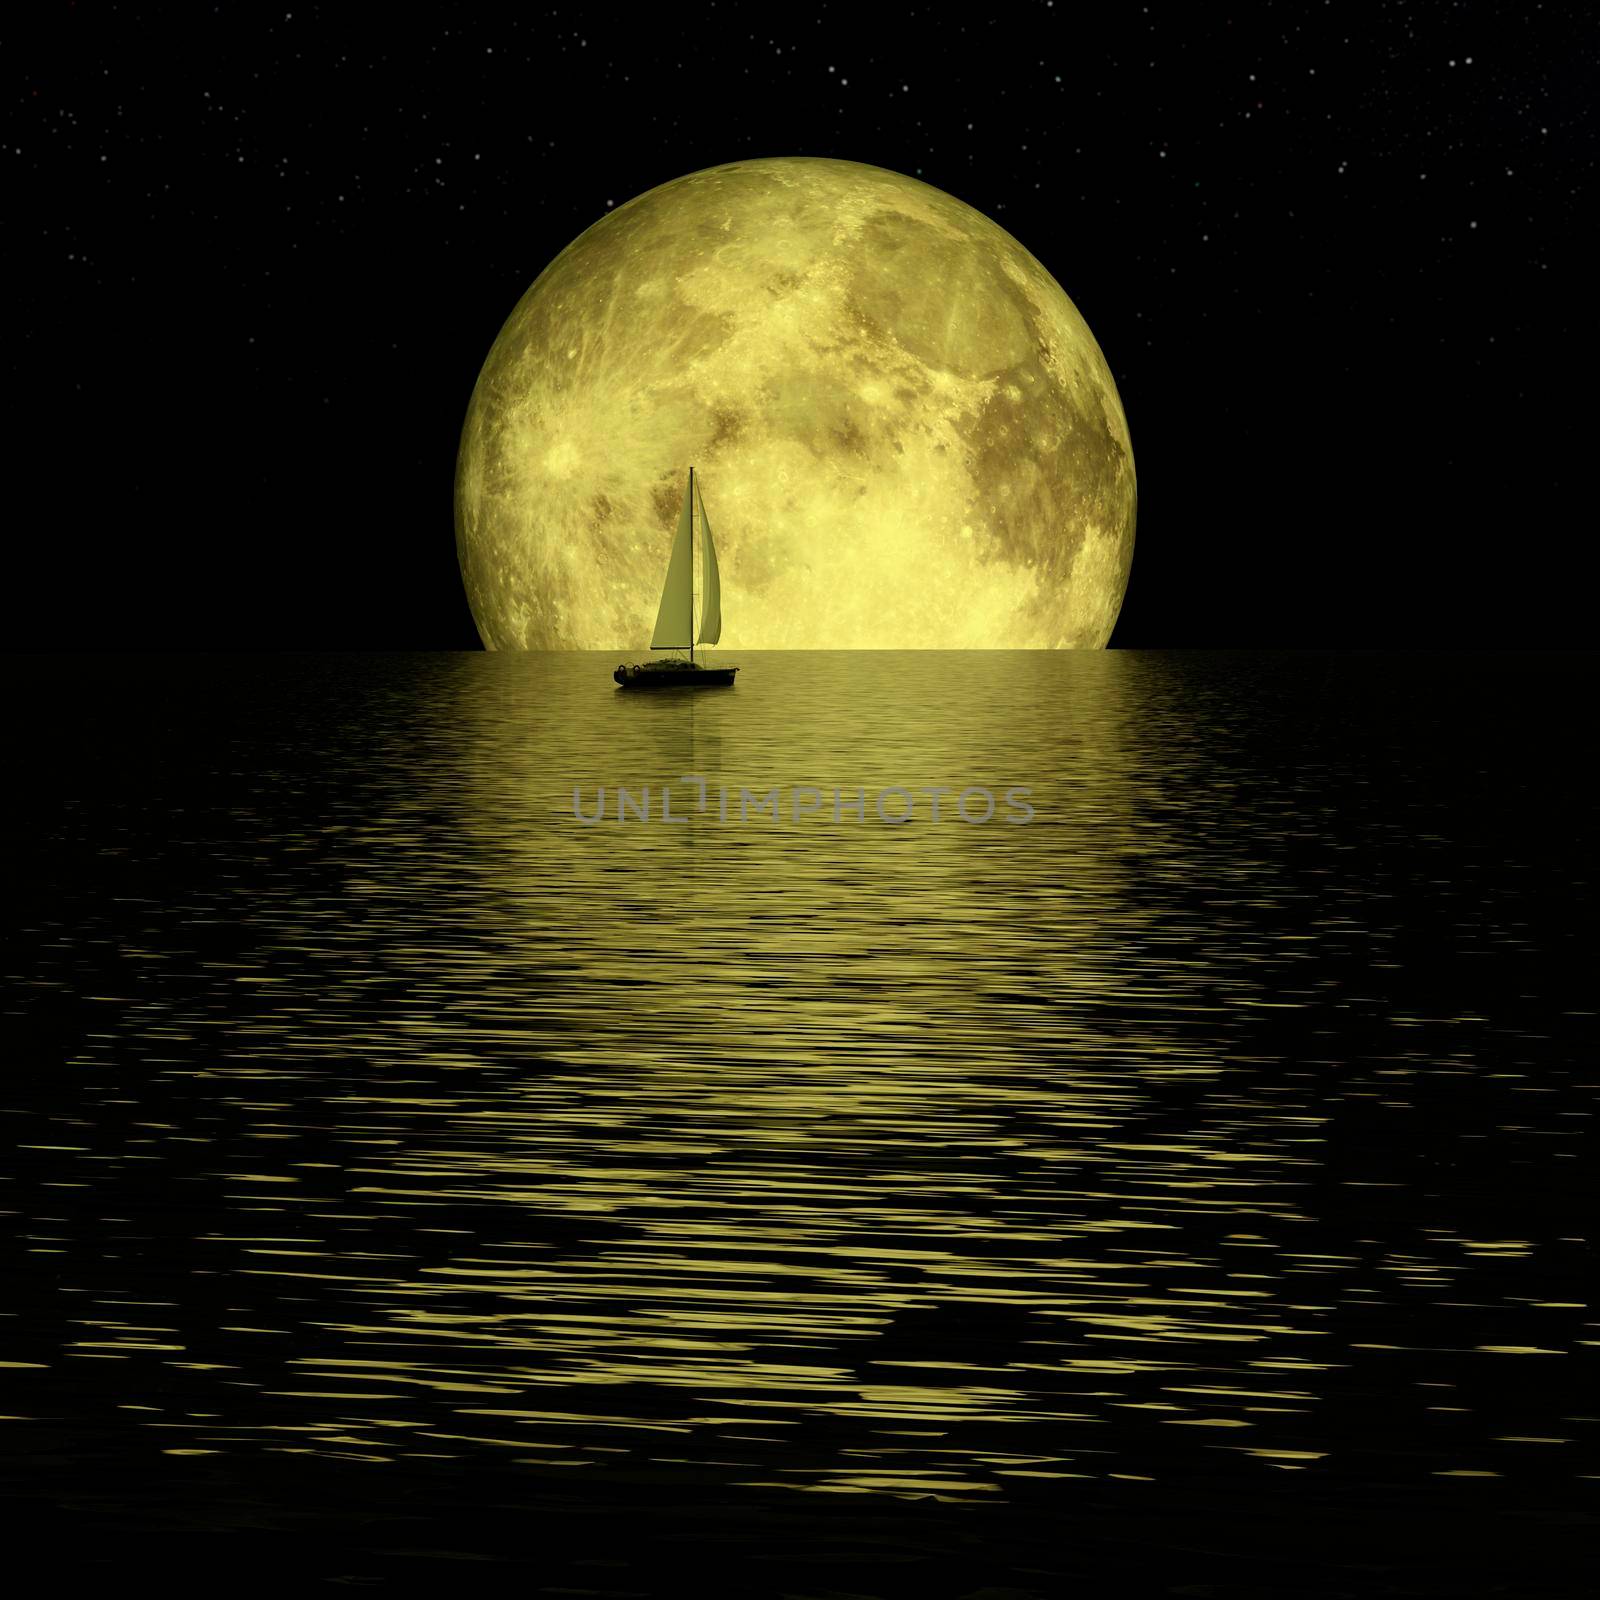 Lonely yacht in calm ocean, full yellow moon and stars by ankarb